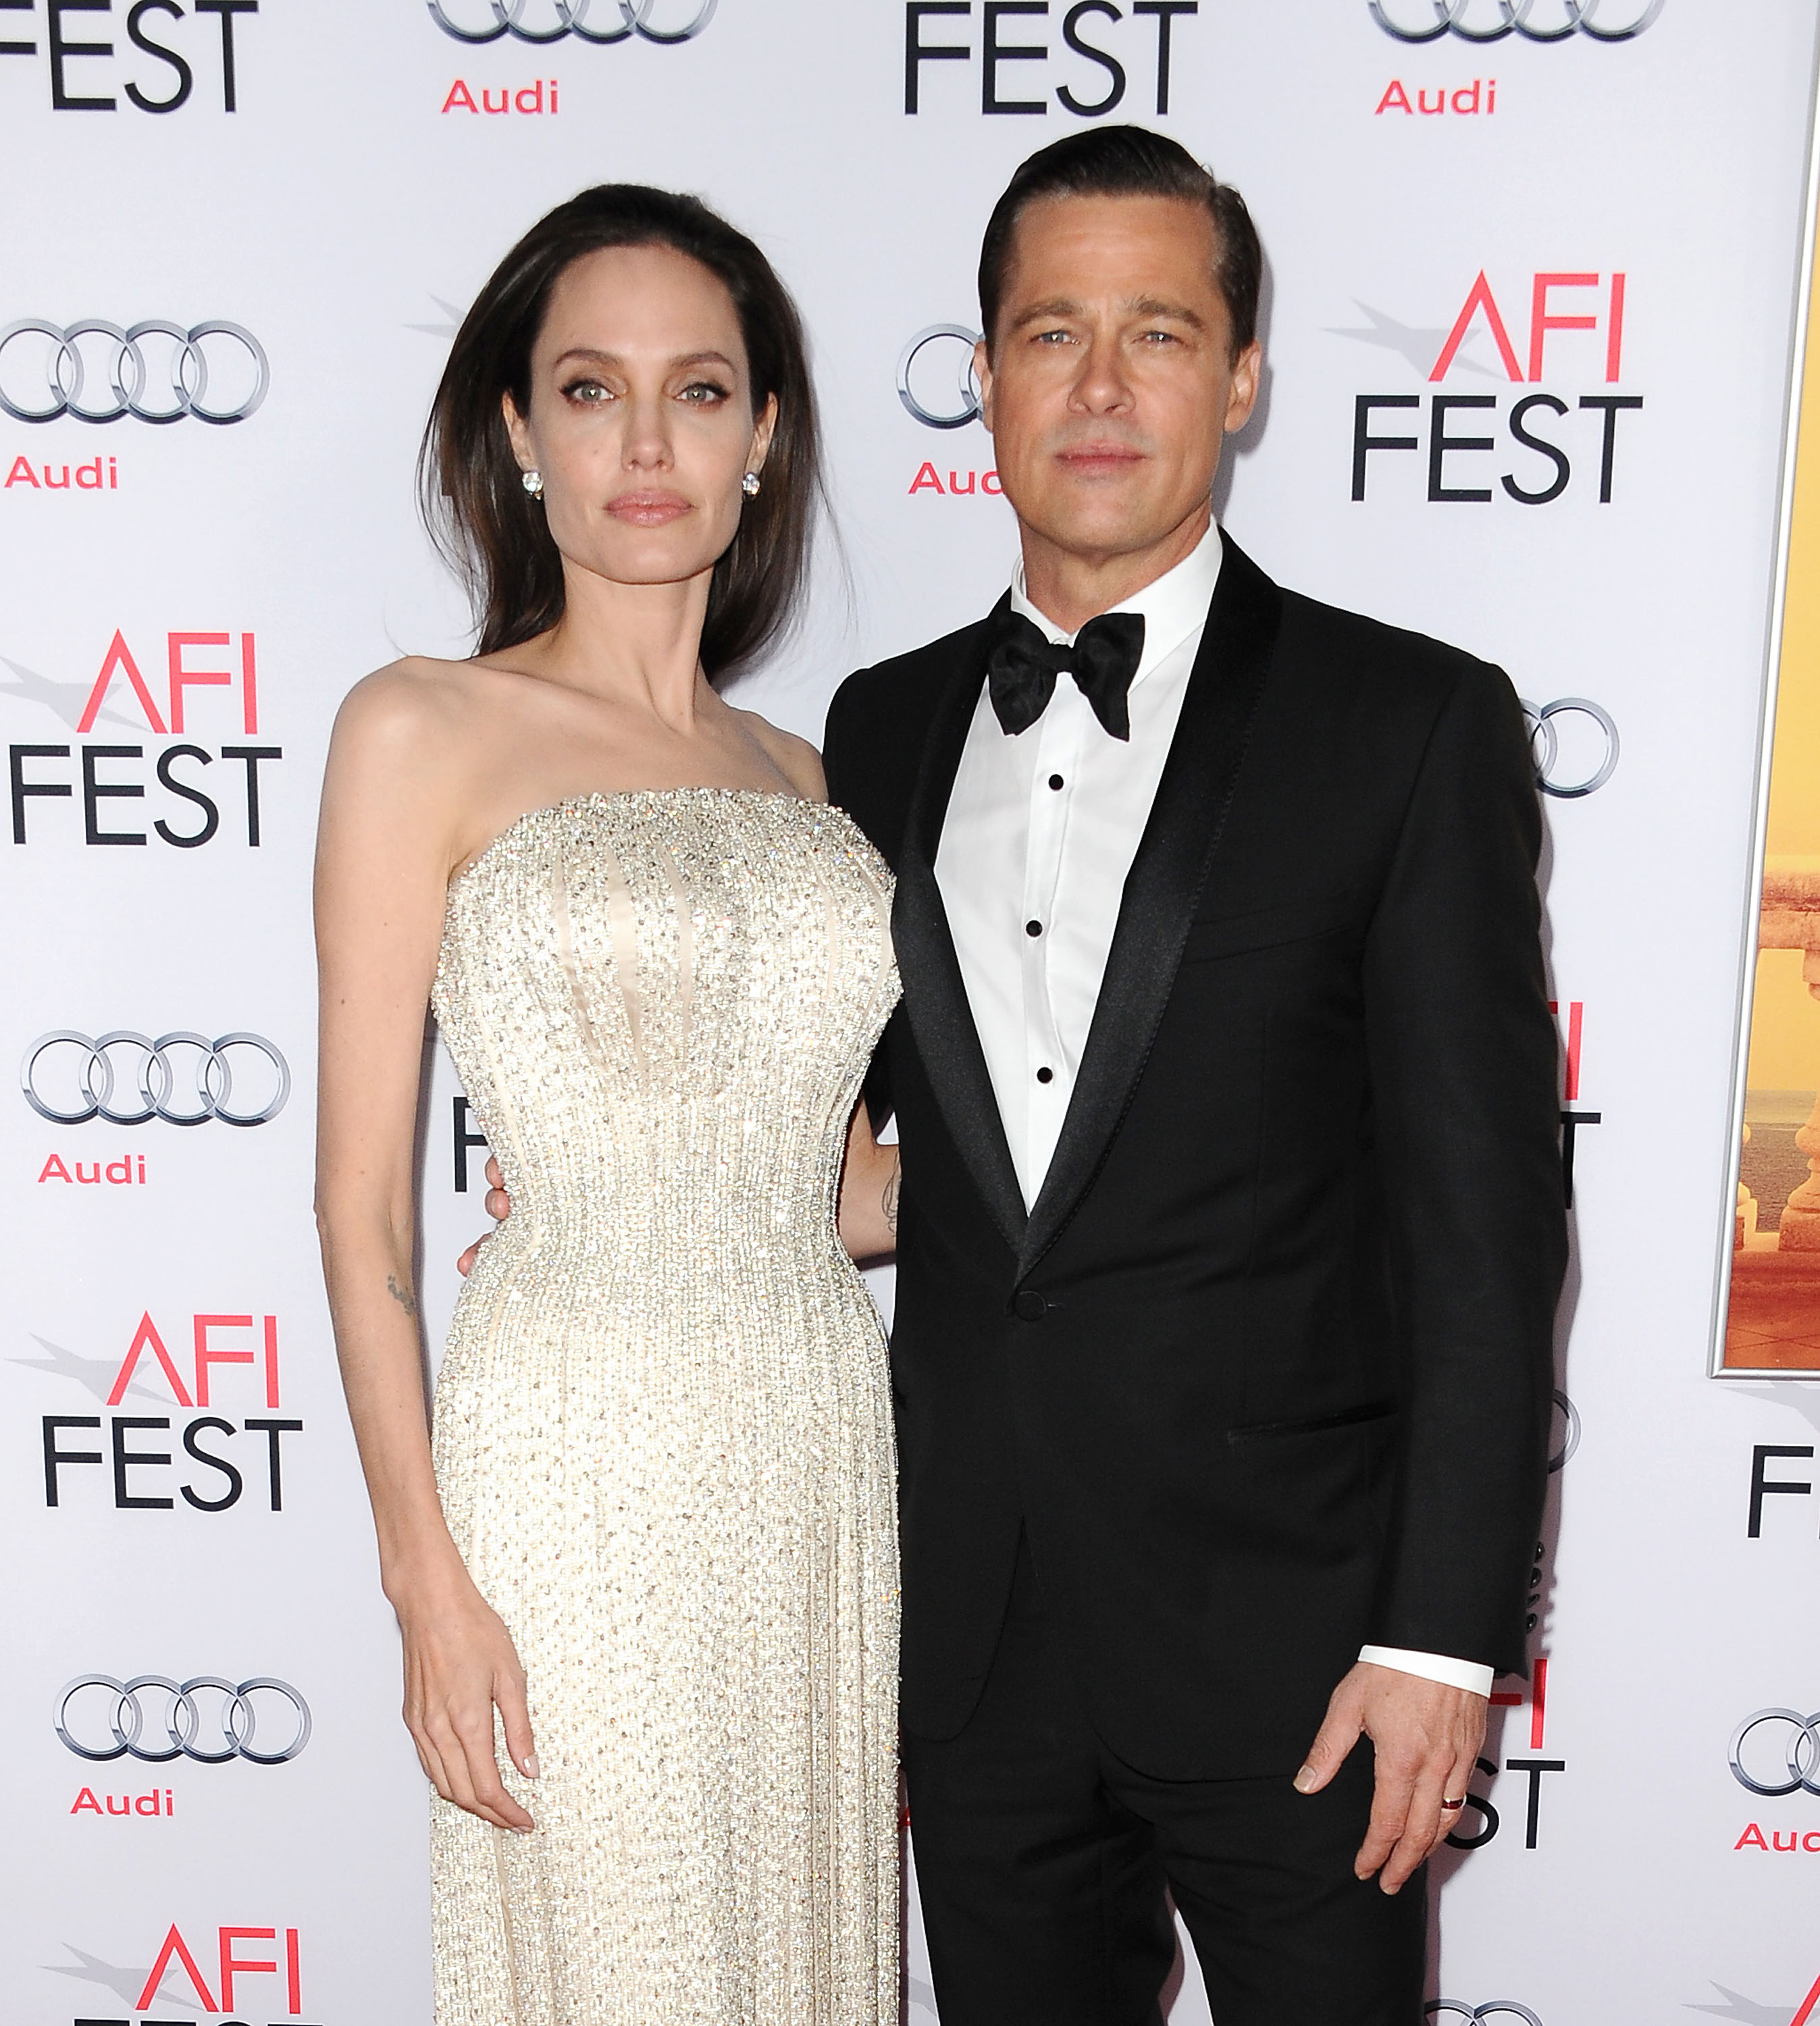 Angelina Jolie and Brad Pitt attend the premiere of "By the Sea" at the AFI Fest at TCL Chinese 6 Theatres in Hollywood, California, on November 5, 2015. | Source: Getty Images